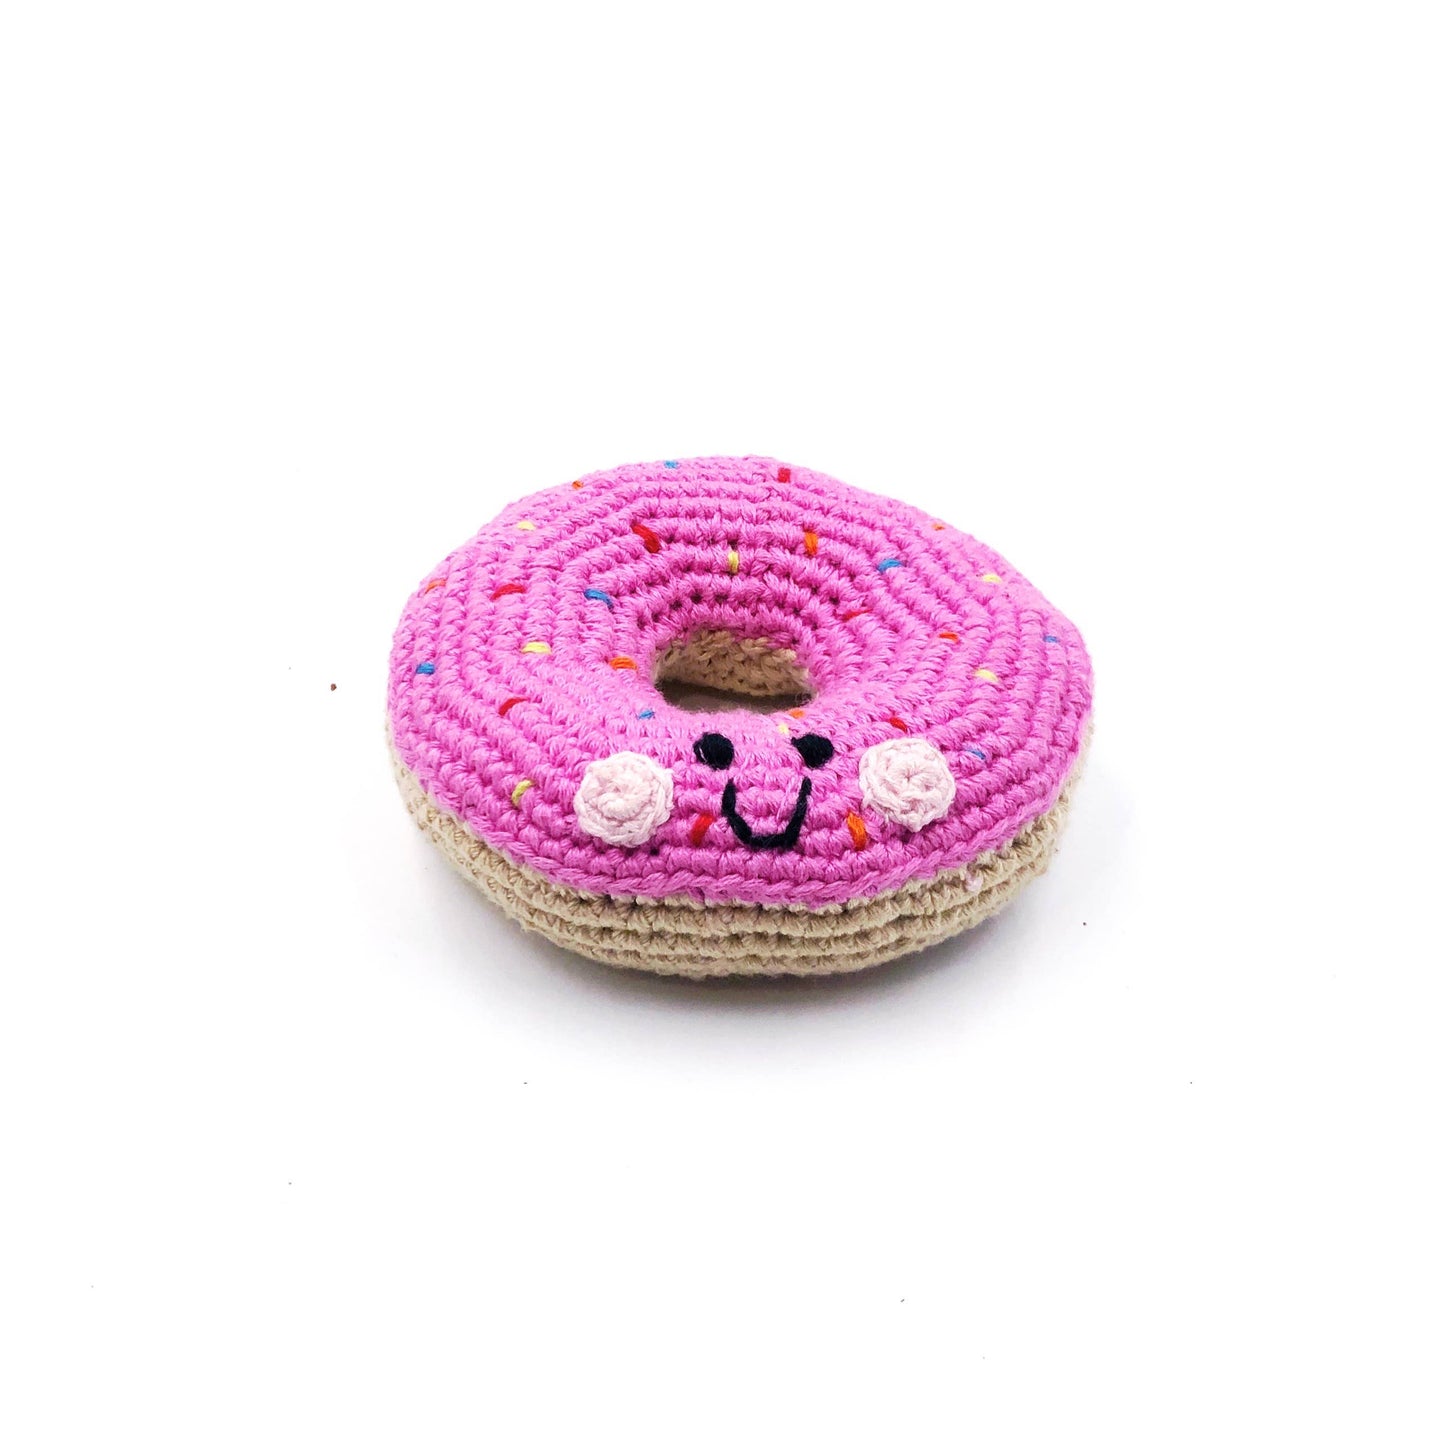 Stocking Filler Baby Soft Toy doughnut rattle - mid pink